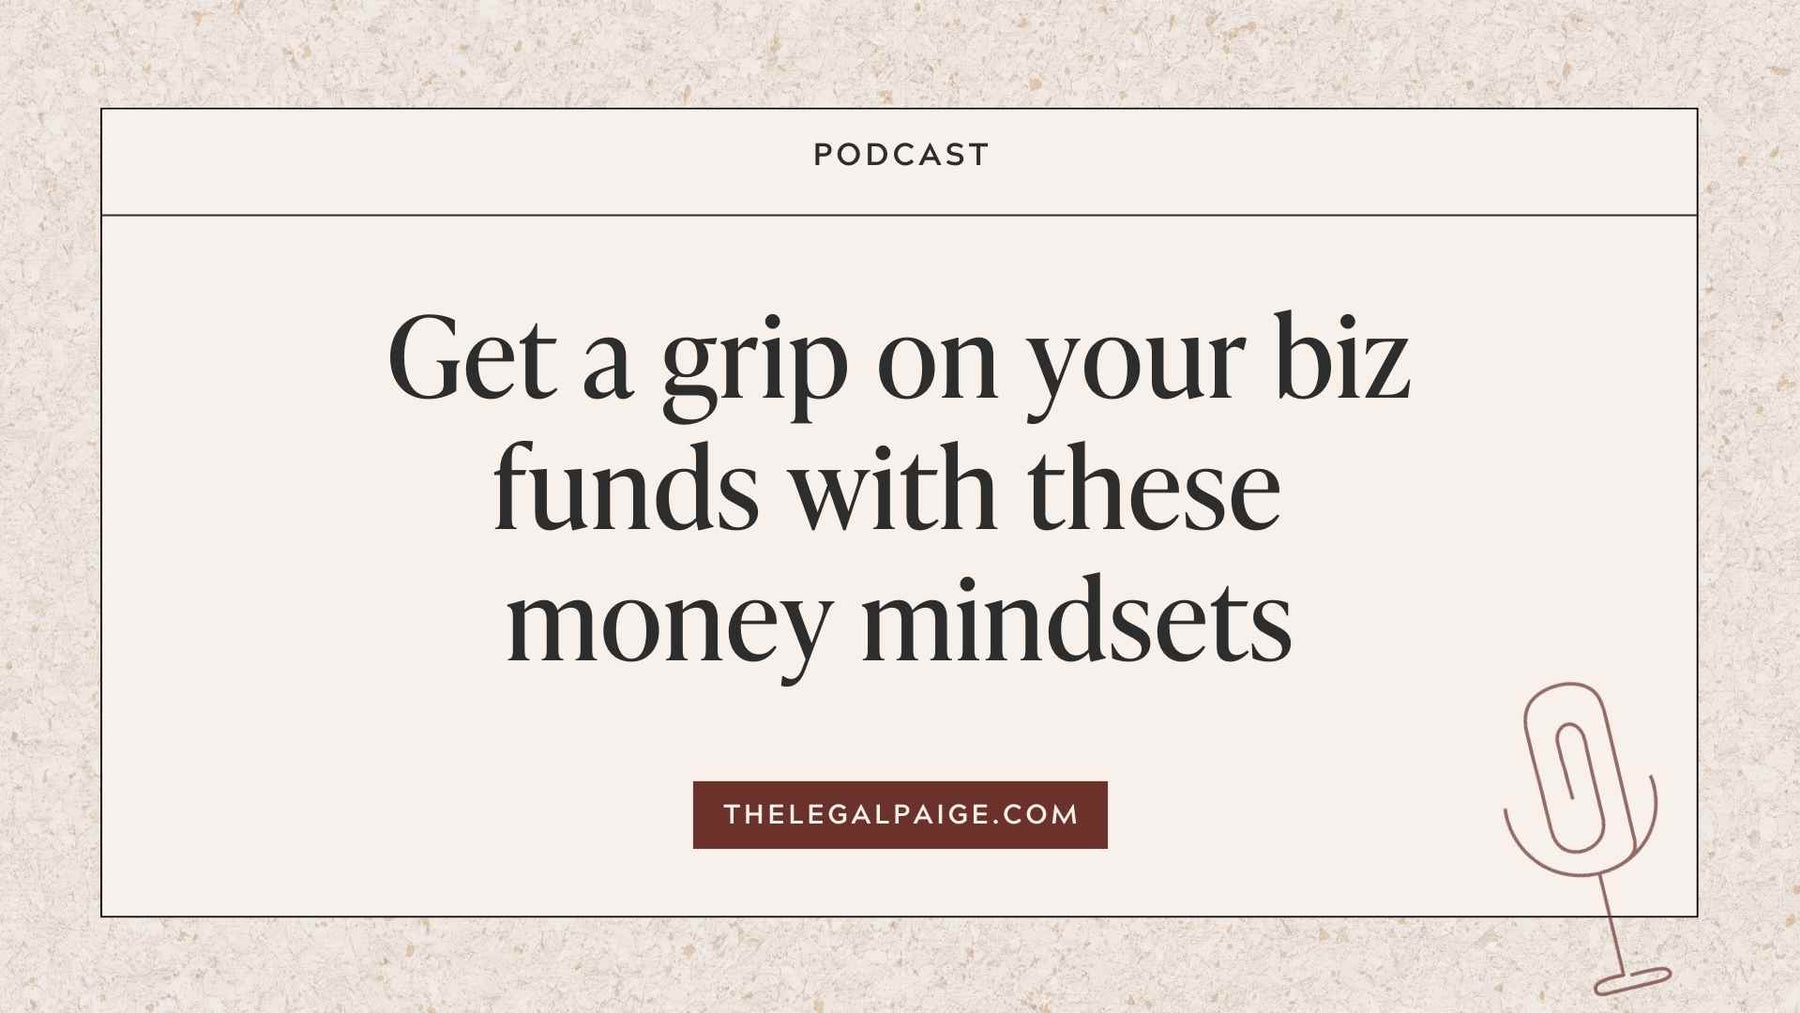 Get a grip on your biz funds with these money mindsets﻿